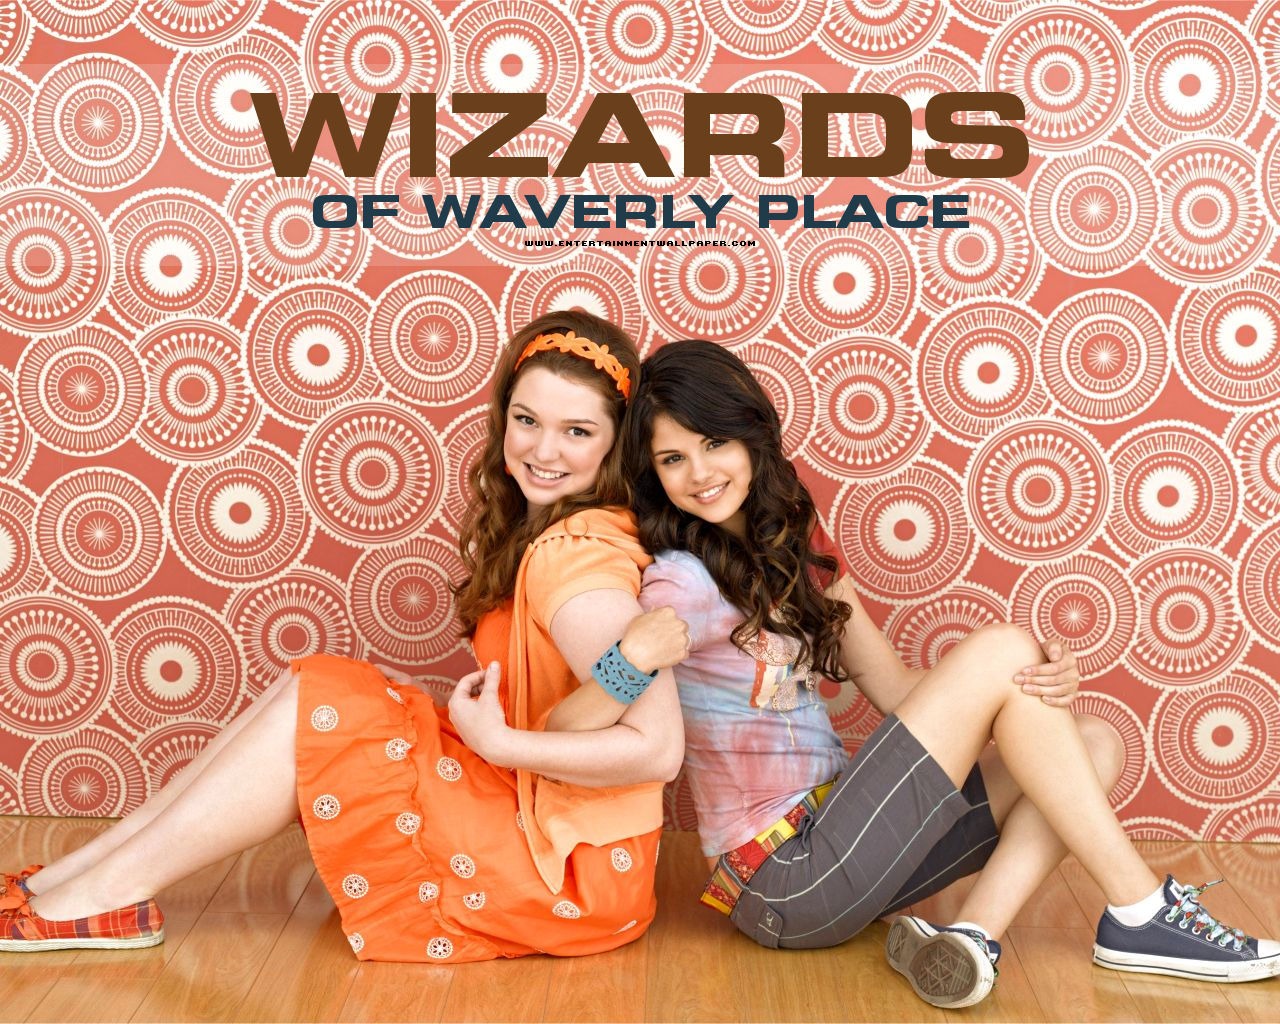 Wizards of Waverly Place Tapete #9 - 1280x1024